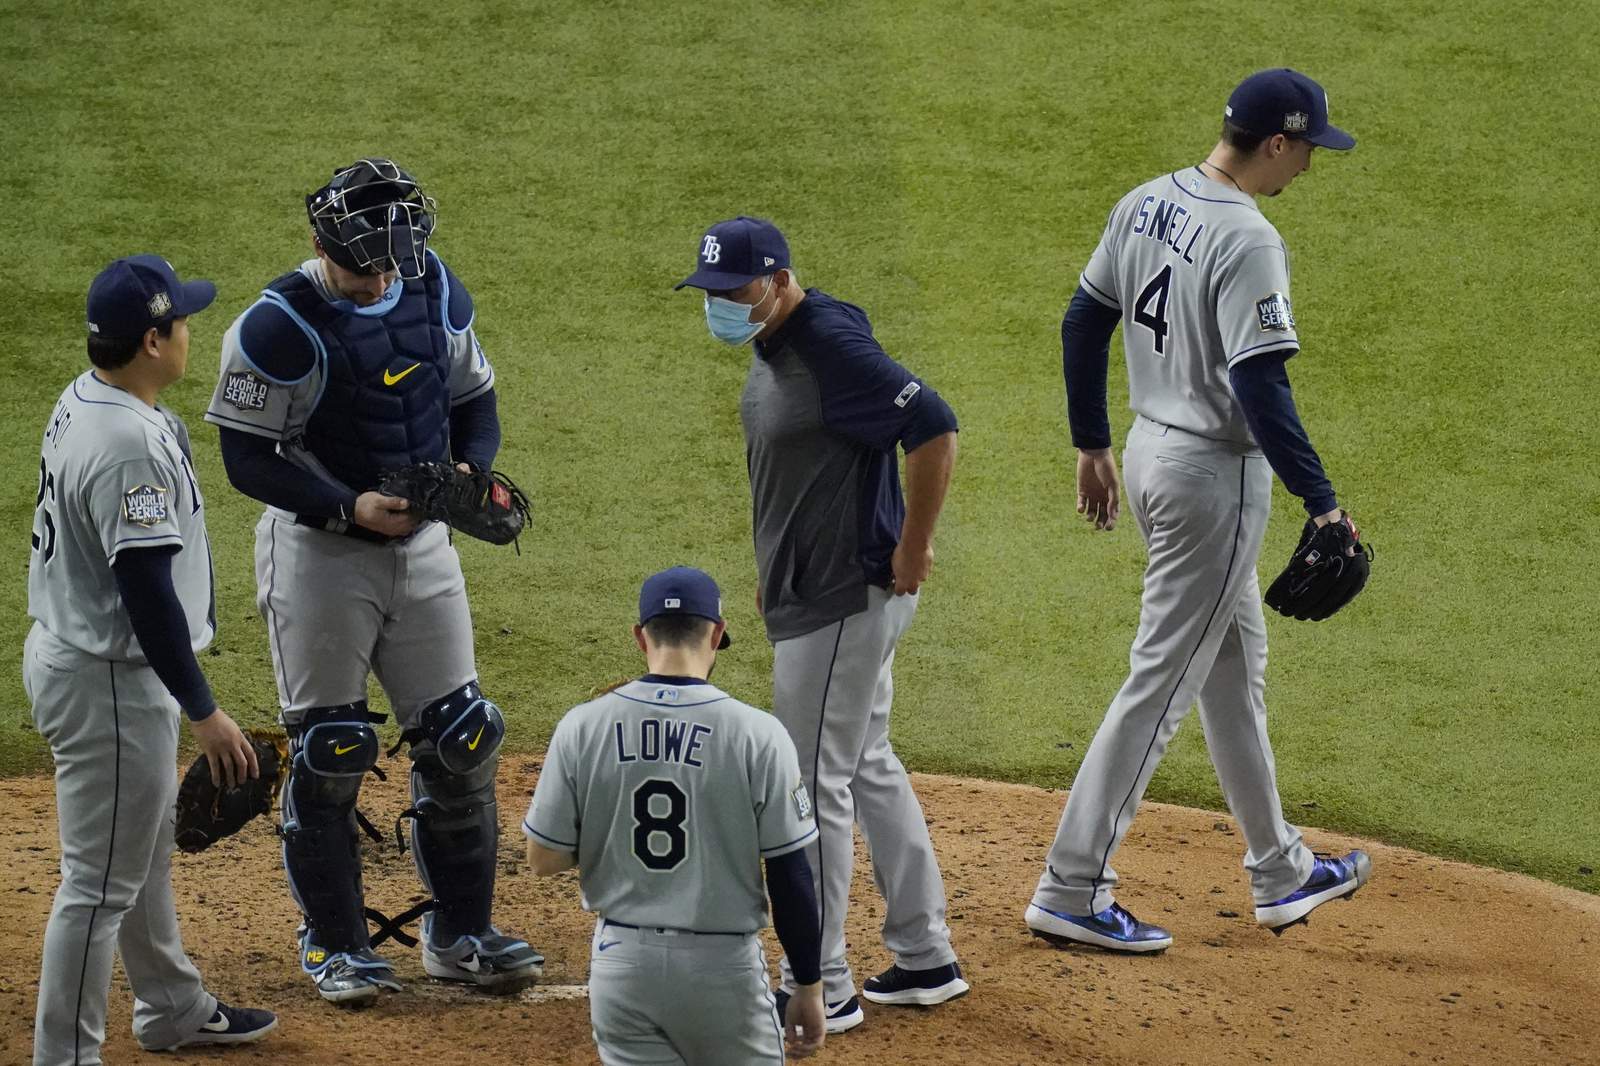 Cash's bullpen blunder joins Little, others in playoff lore